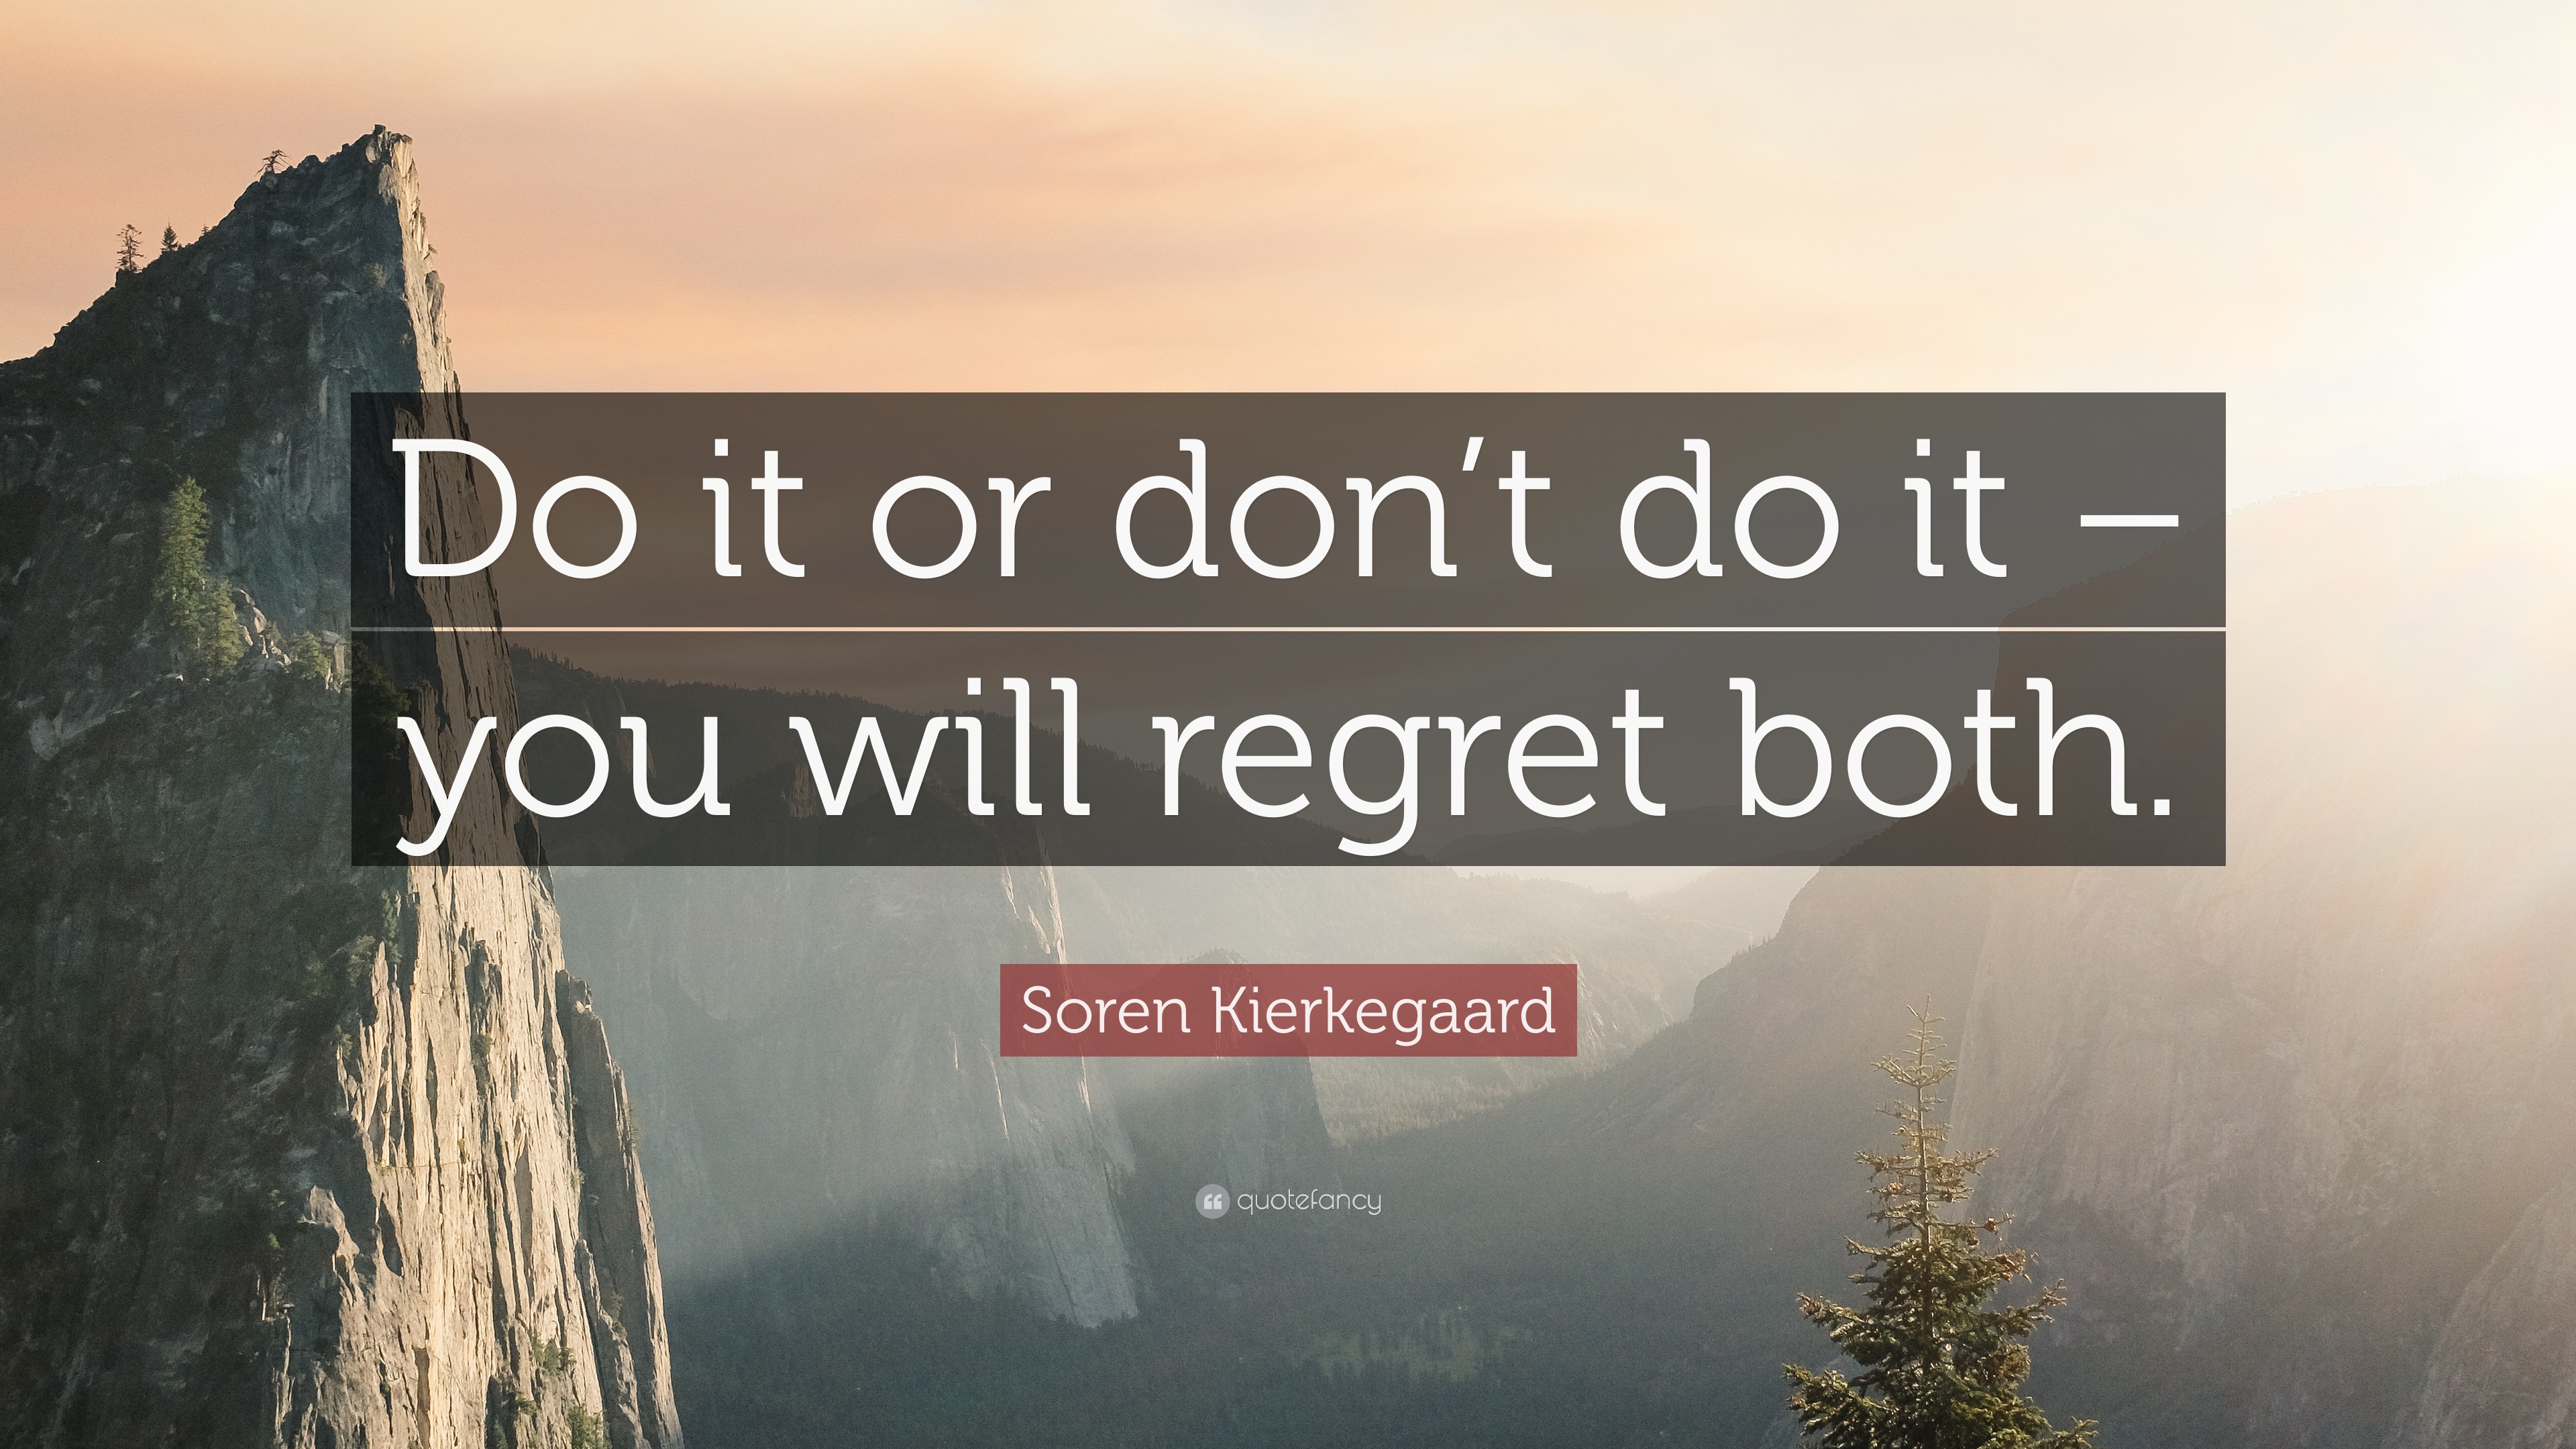 Soren Kierkegaard - do it or don't, you'll regret both  Kierkegaard  quotes, Thought provoking quotes, Stoic quotes